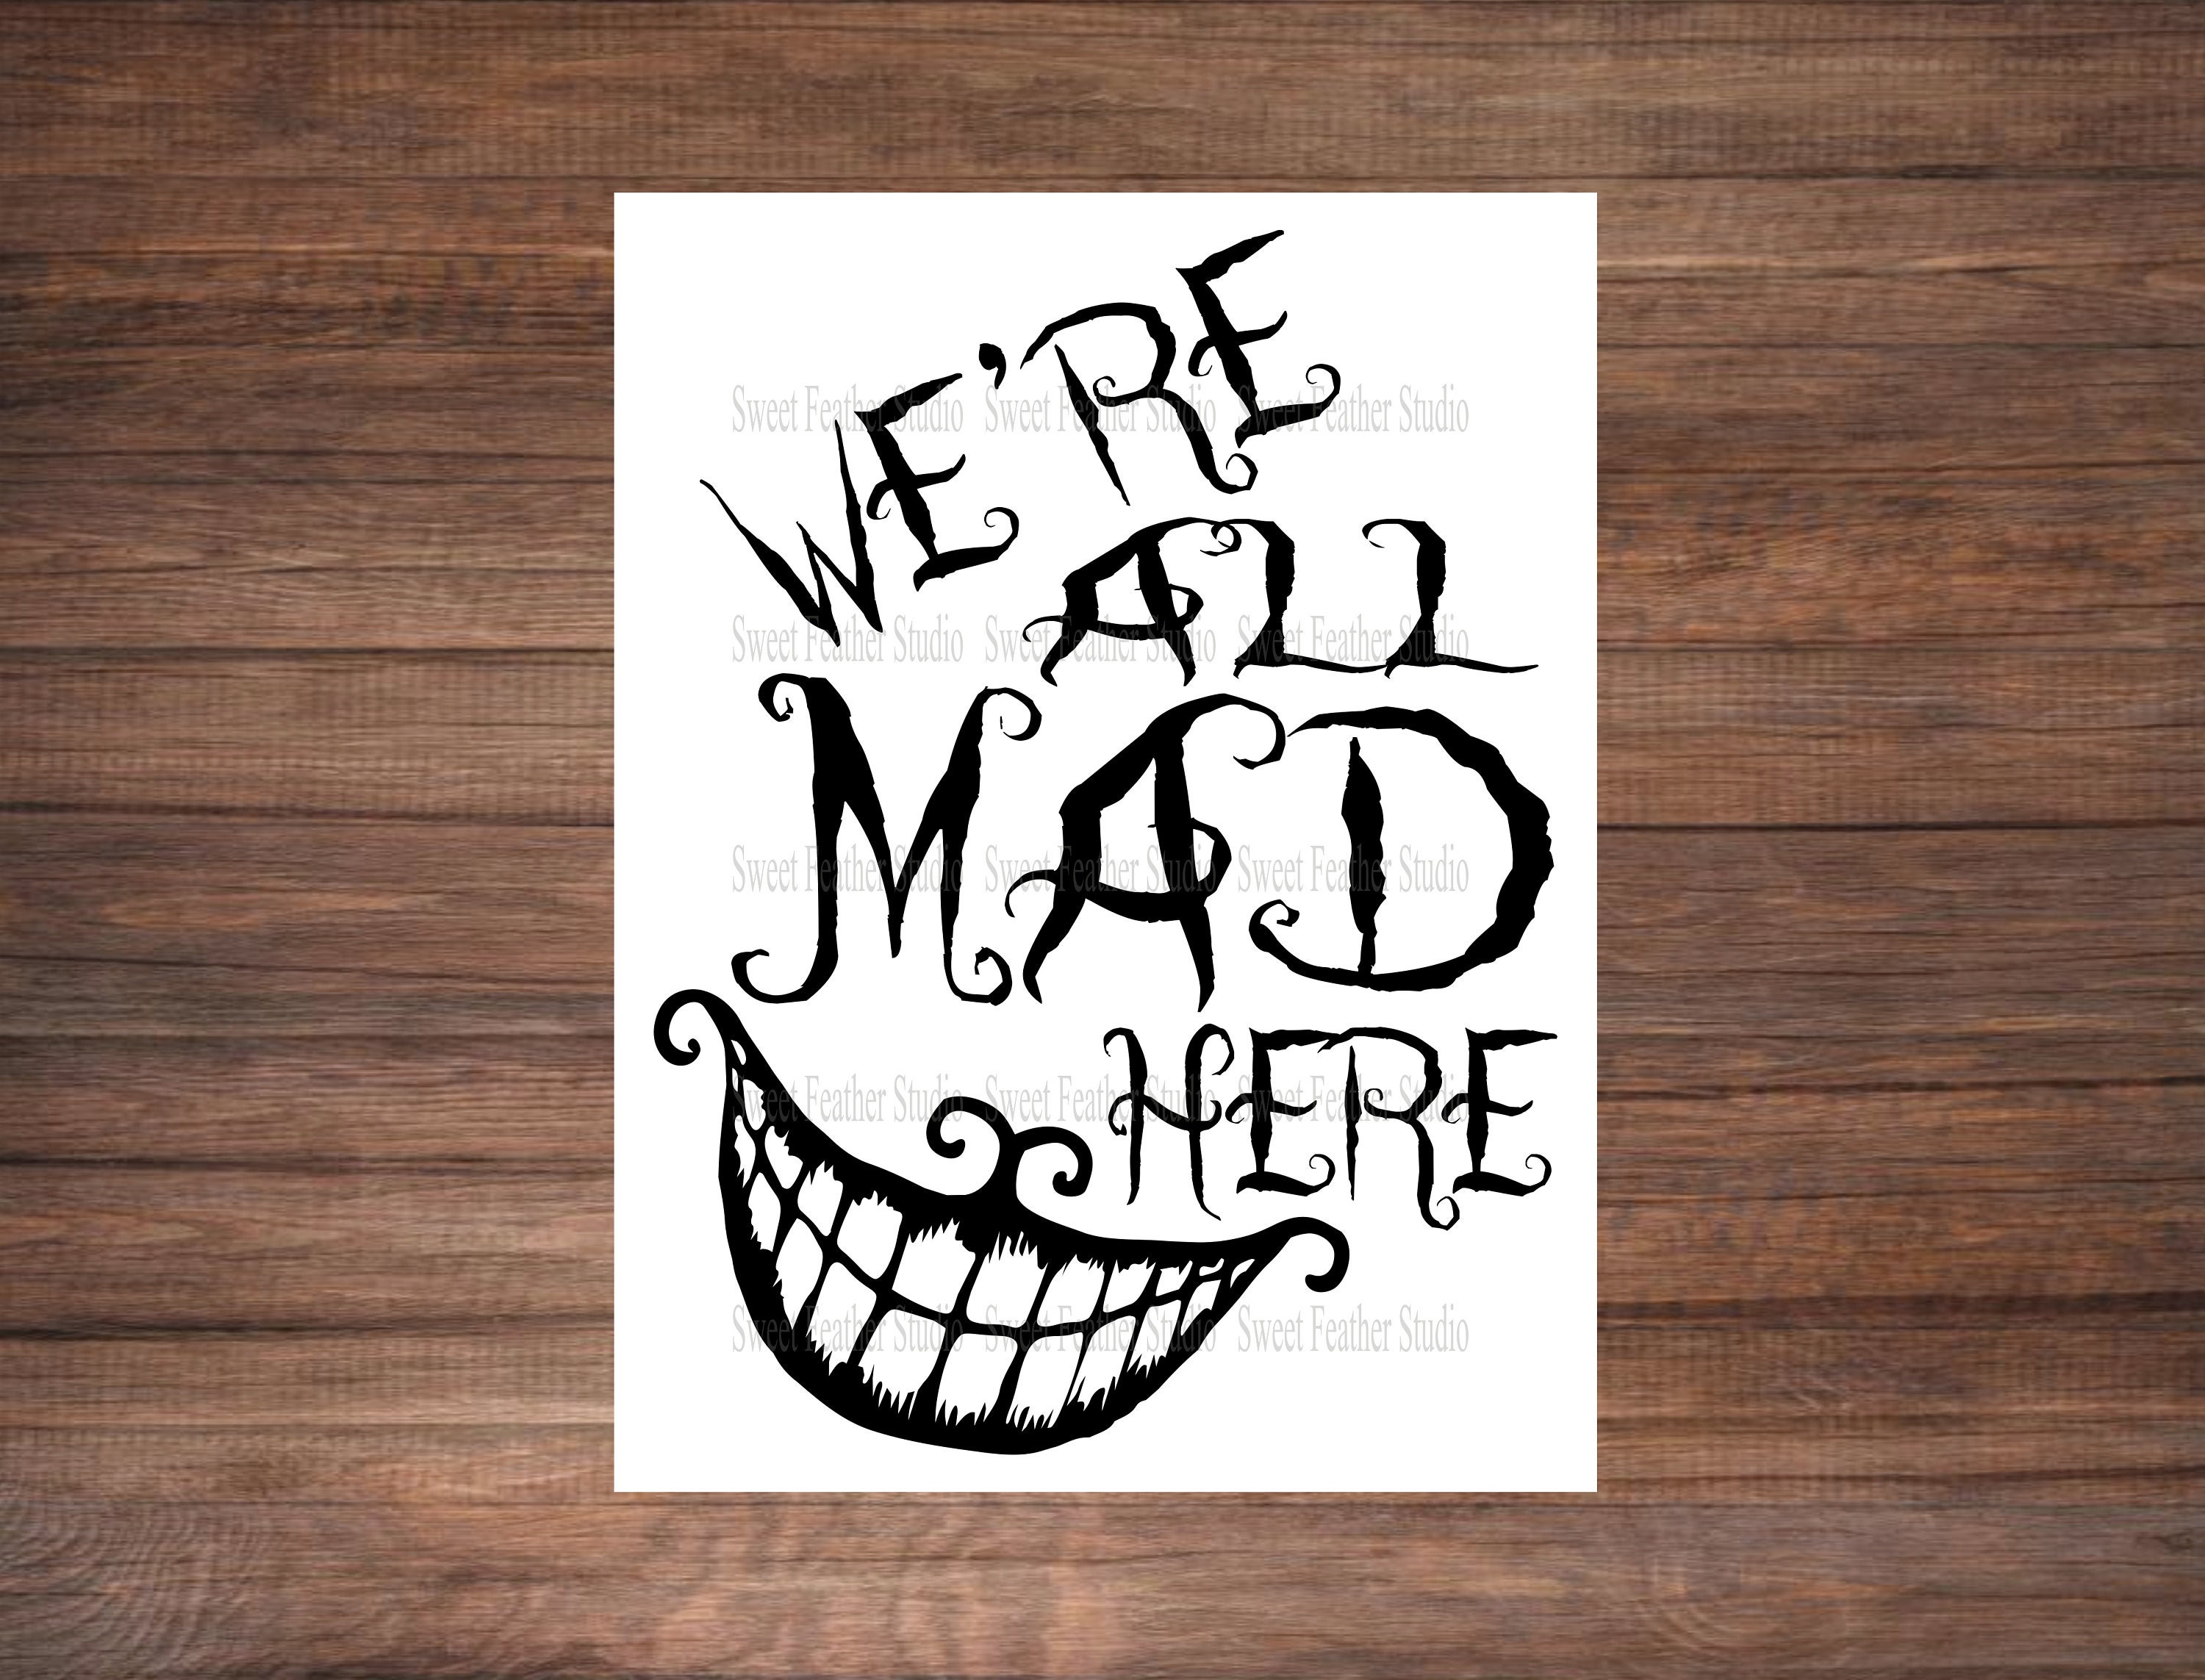 WE'RE ALL MAD HERE VINYL RUG - Junk GYpSy co.